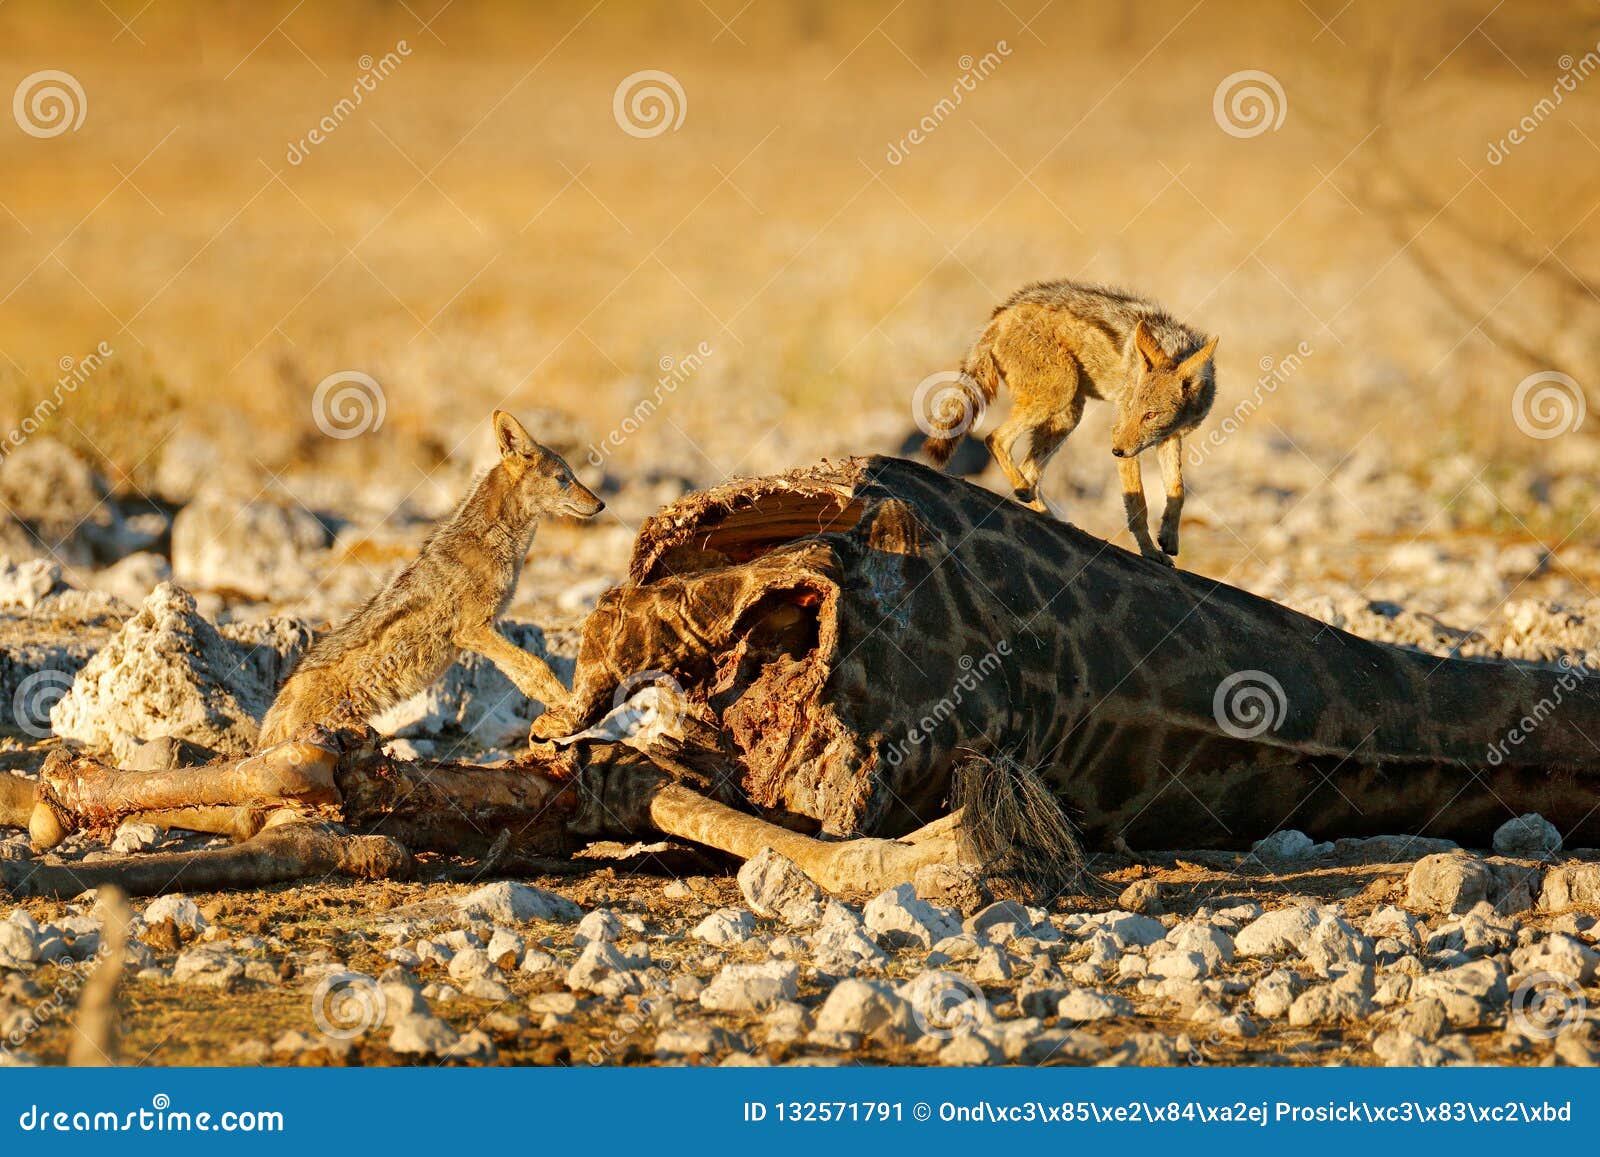 Giraffe Carcass with Two Feeding Jackals, Animal Behaviour in Etosha NP,  Namibia in Africa. Wildlife Scene from Nature Stock Image - Image of grass,  africa: 132571791